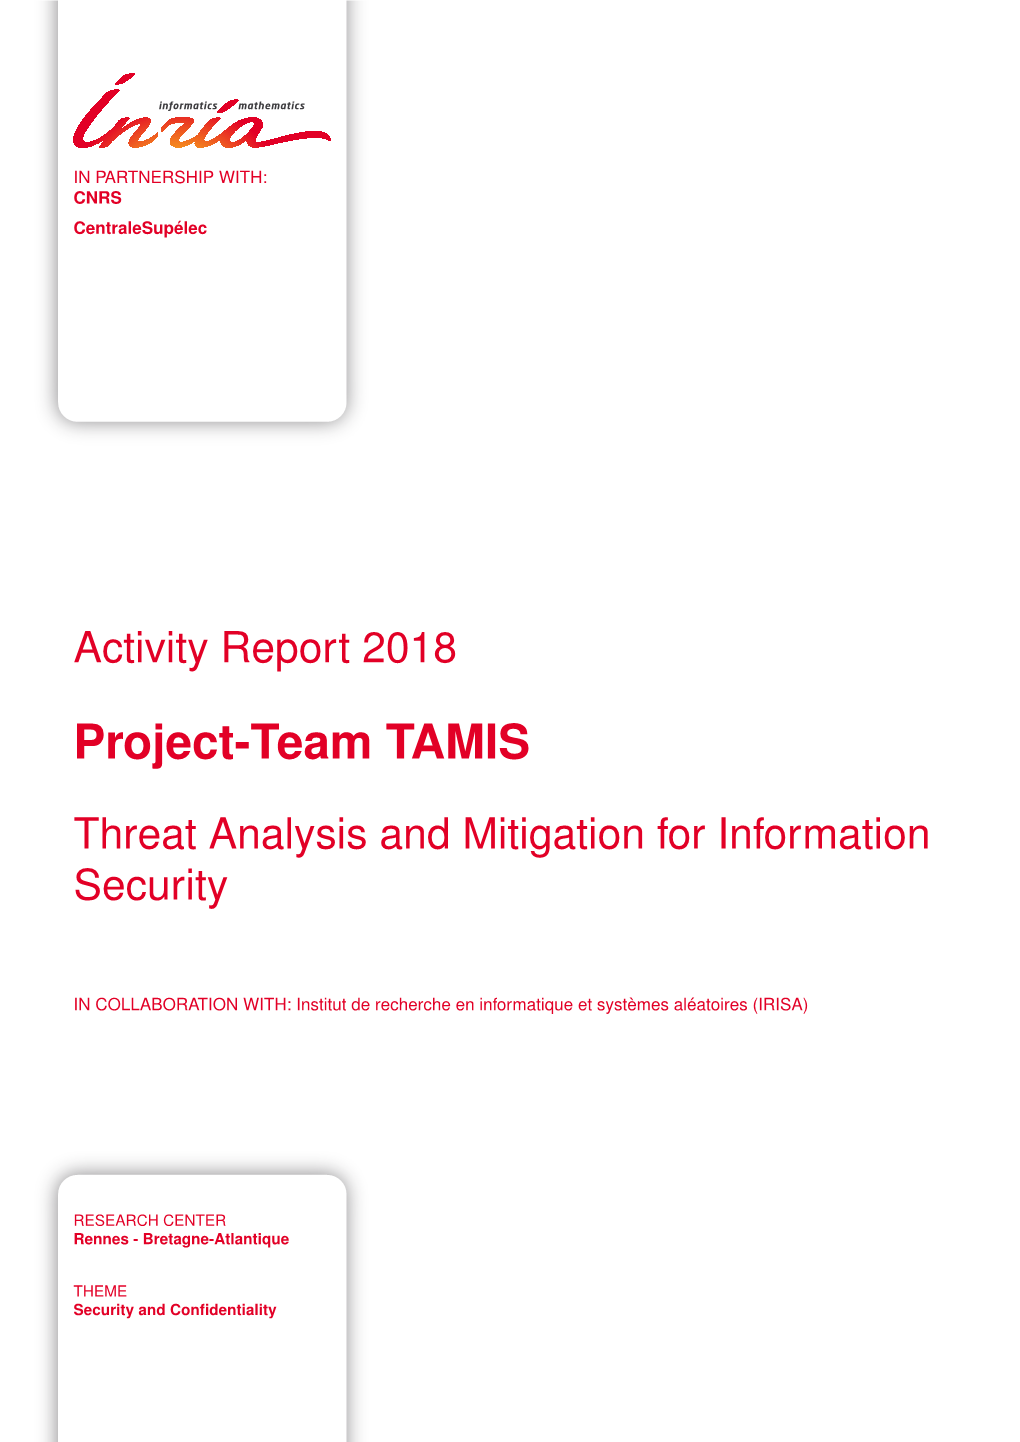 Project-Team TAMIS